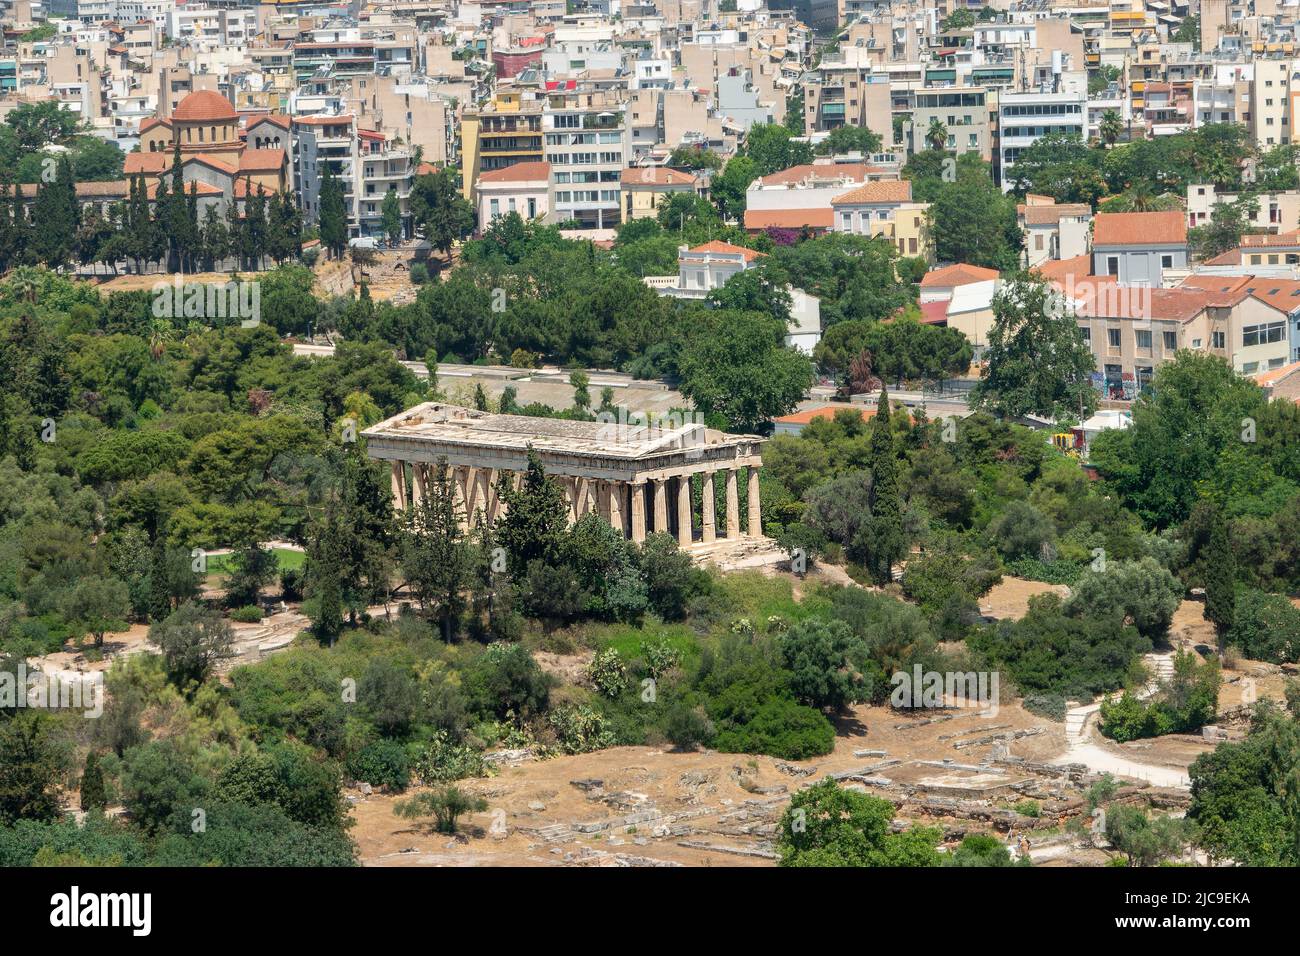 The Hephaisteion - Temple of Hephaestus at the Agora of Athens, Greece. Built circa 450 BCE. Viewed from the Acropolis. Stock Photo